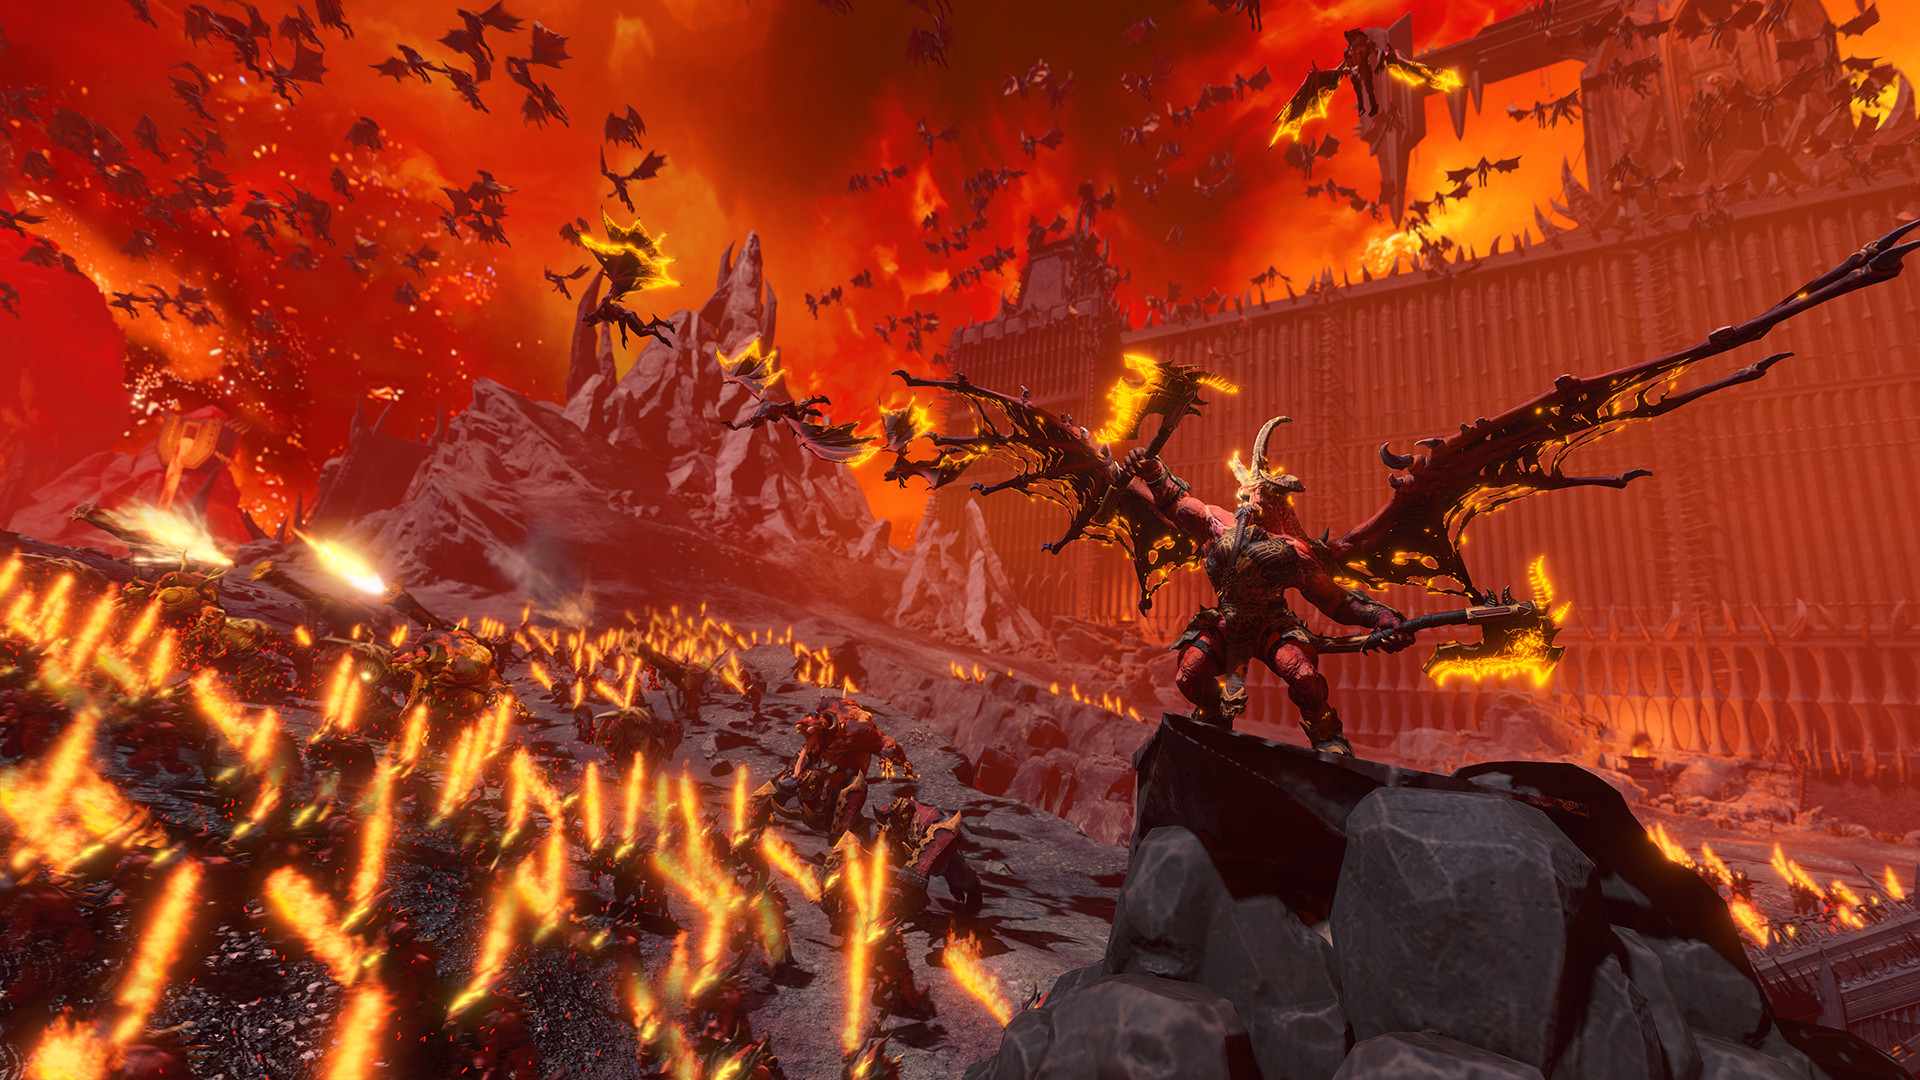 Total War: Warhammer 3 will introduce exciting new rules for magic